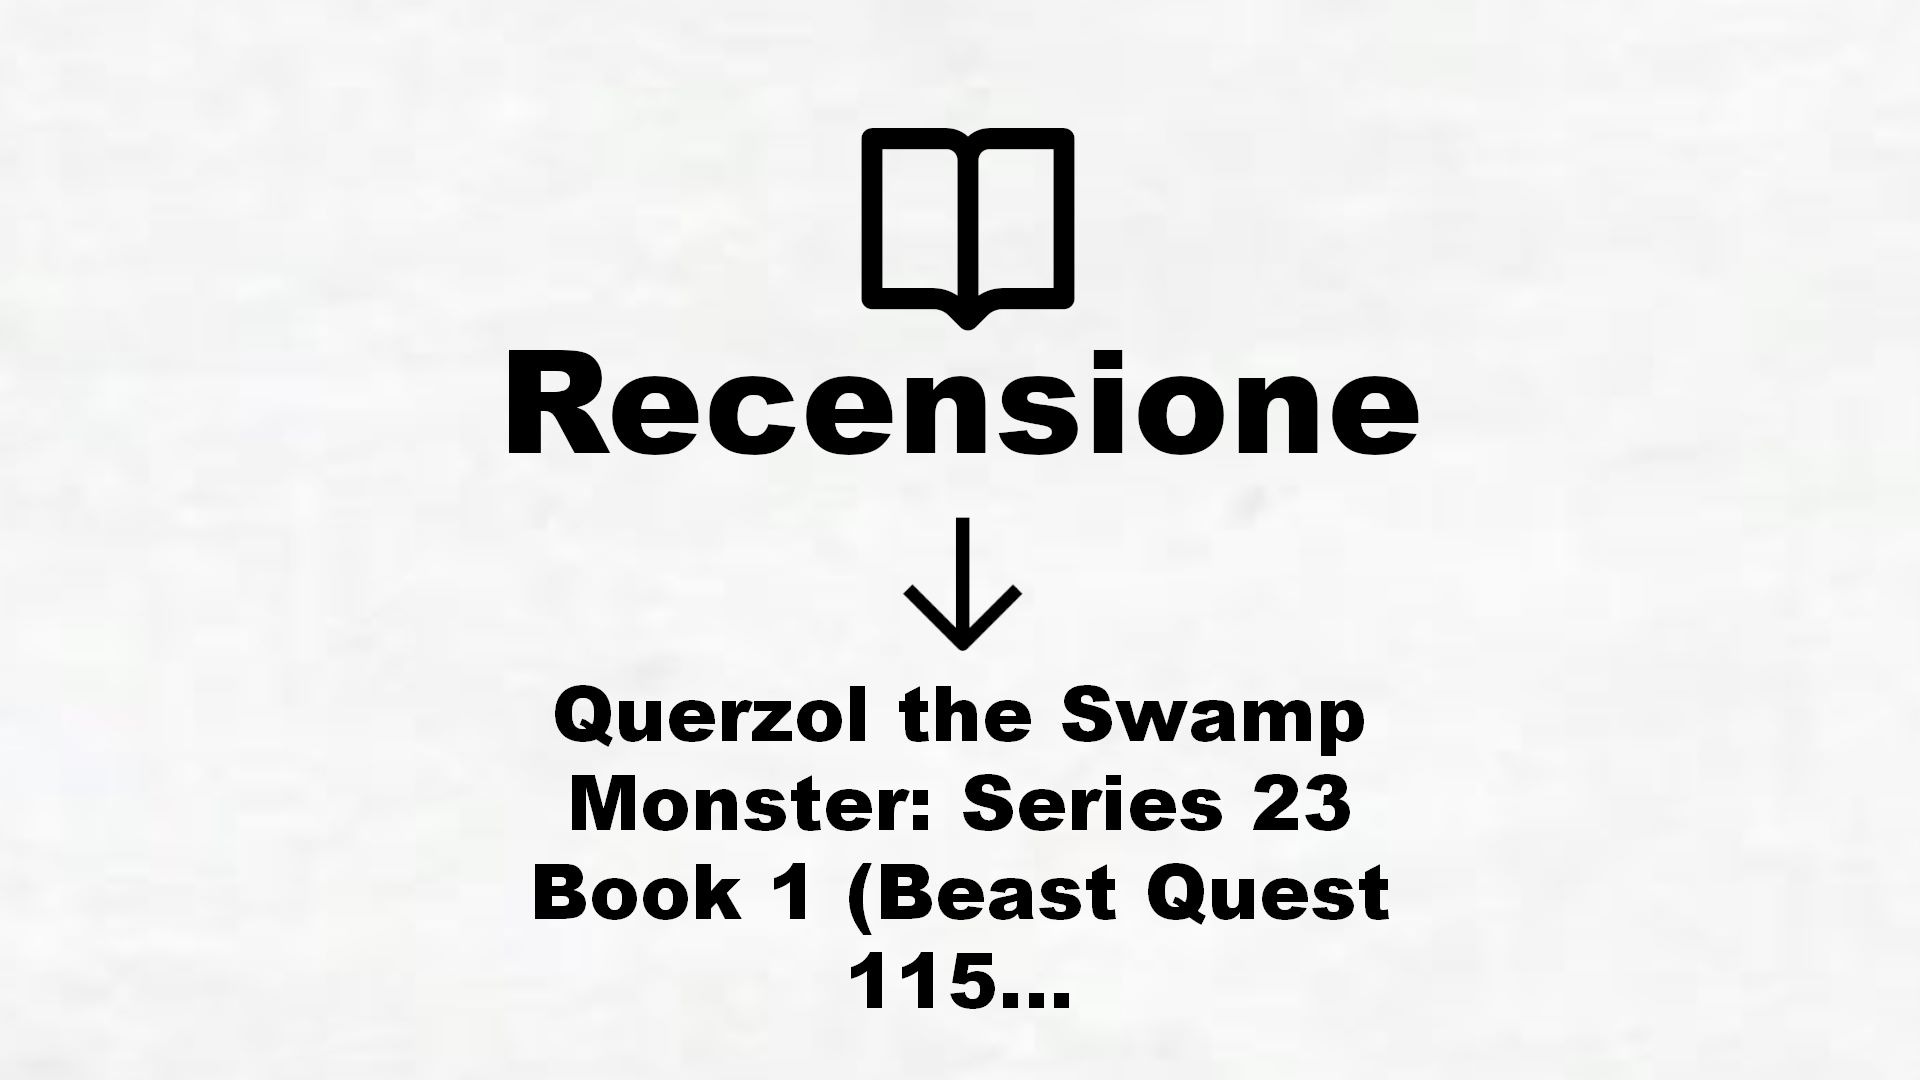 Querzol the Swamp Monster: Series 23 Book 1 (Beast Quest 115) (English Edition) – Recensione Libro